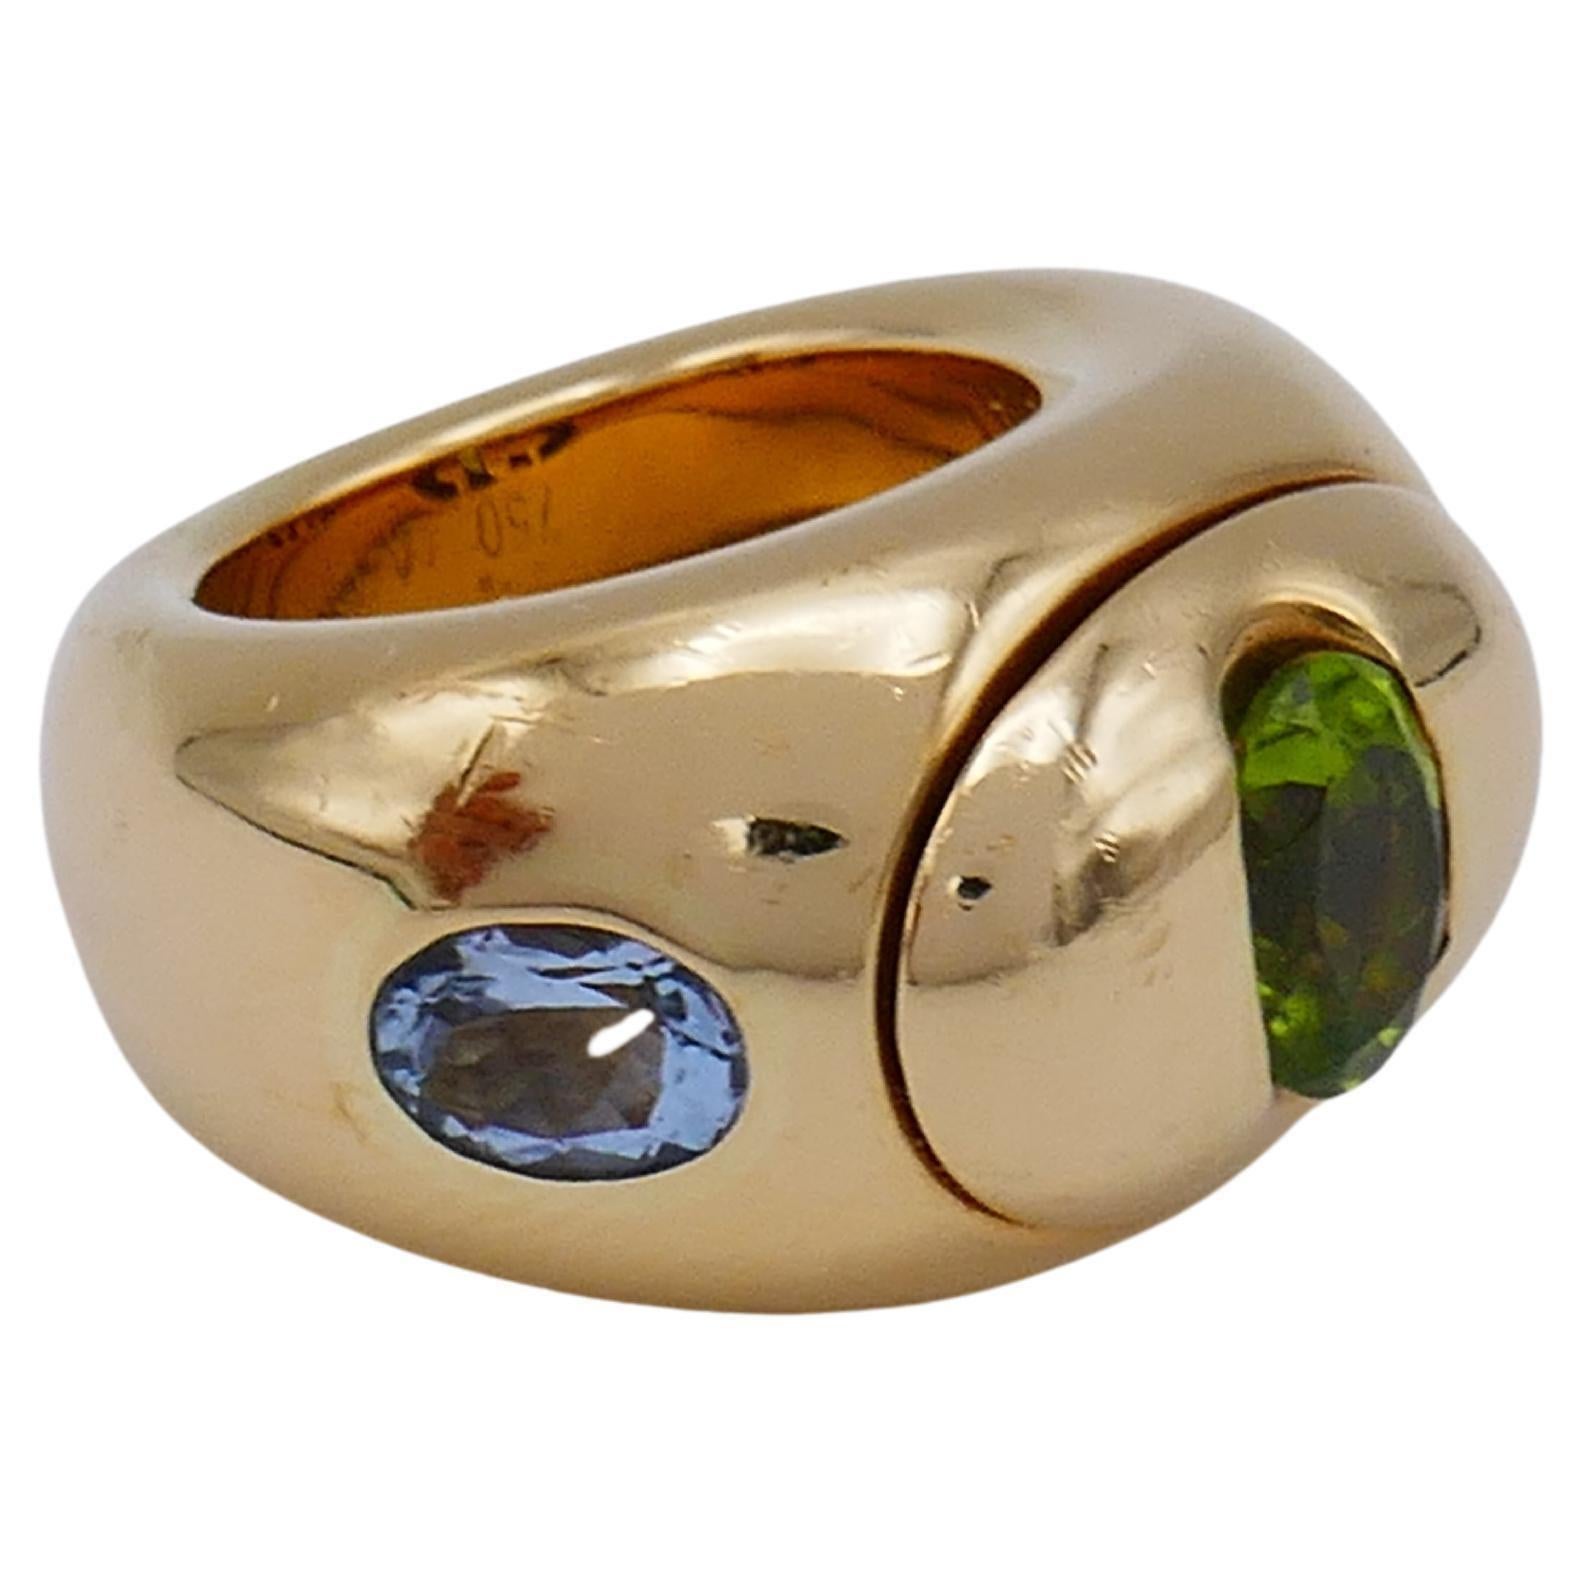 An amazing multi gemstone 18k gold band ring by Christian Dior. Features peridot, blue topaz and pink tourmaline. Has pierced 